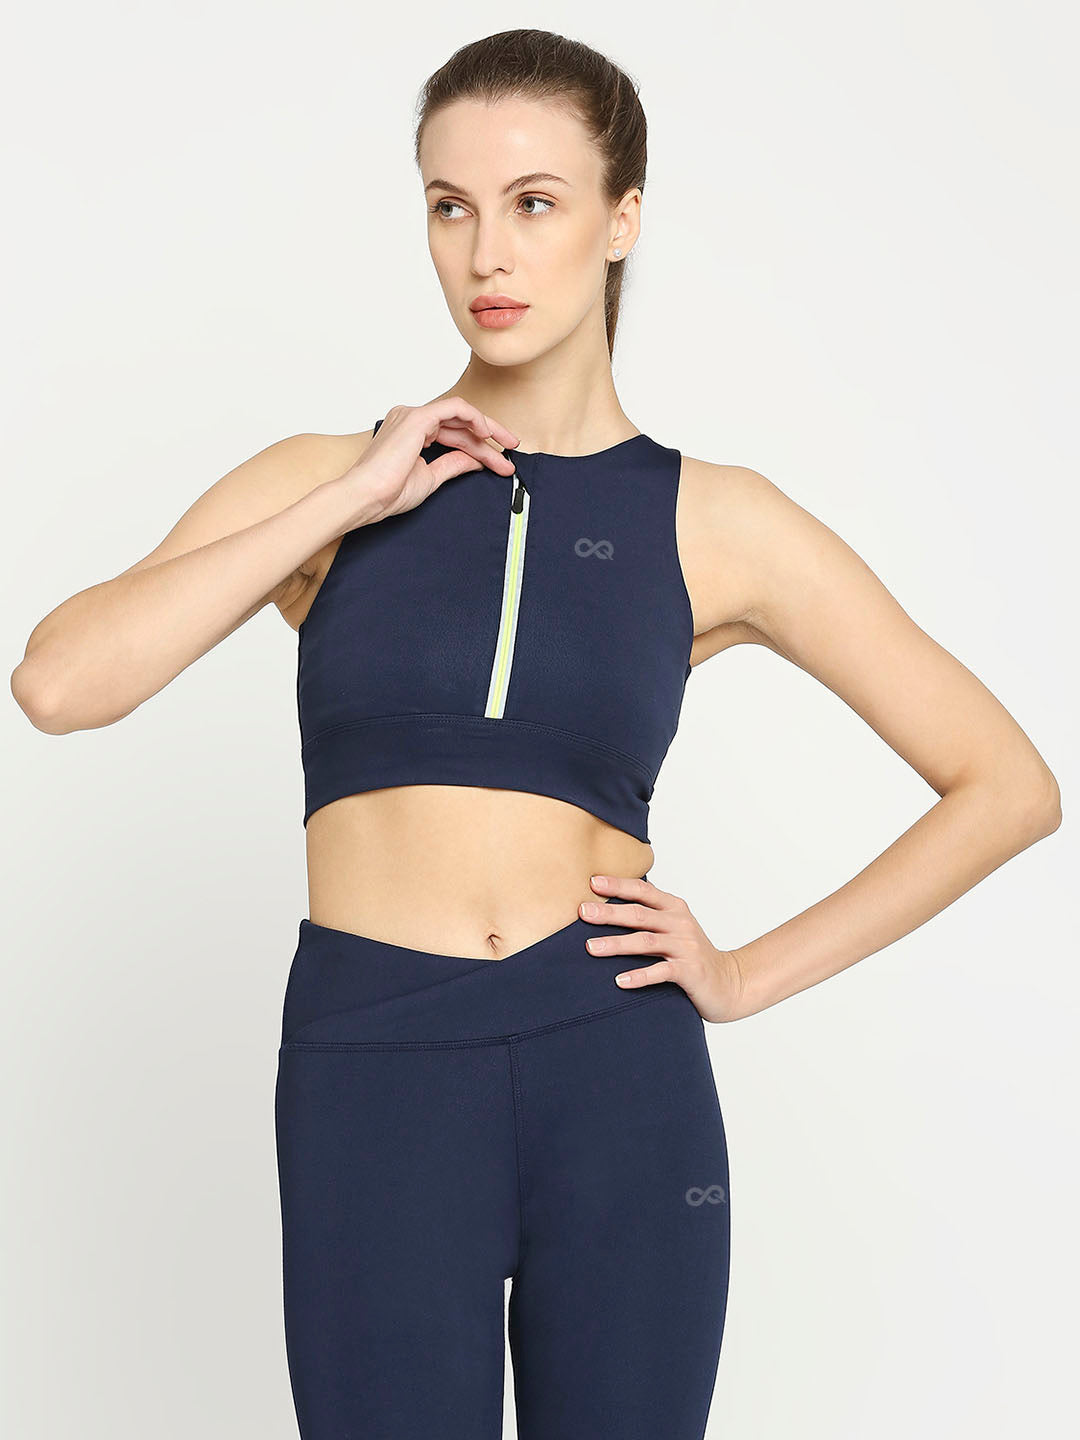 Women's Navy Blue Sports Bra With Zipper - Stay Supported and